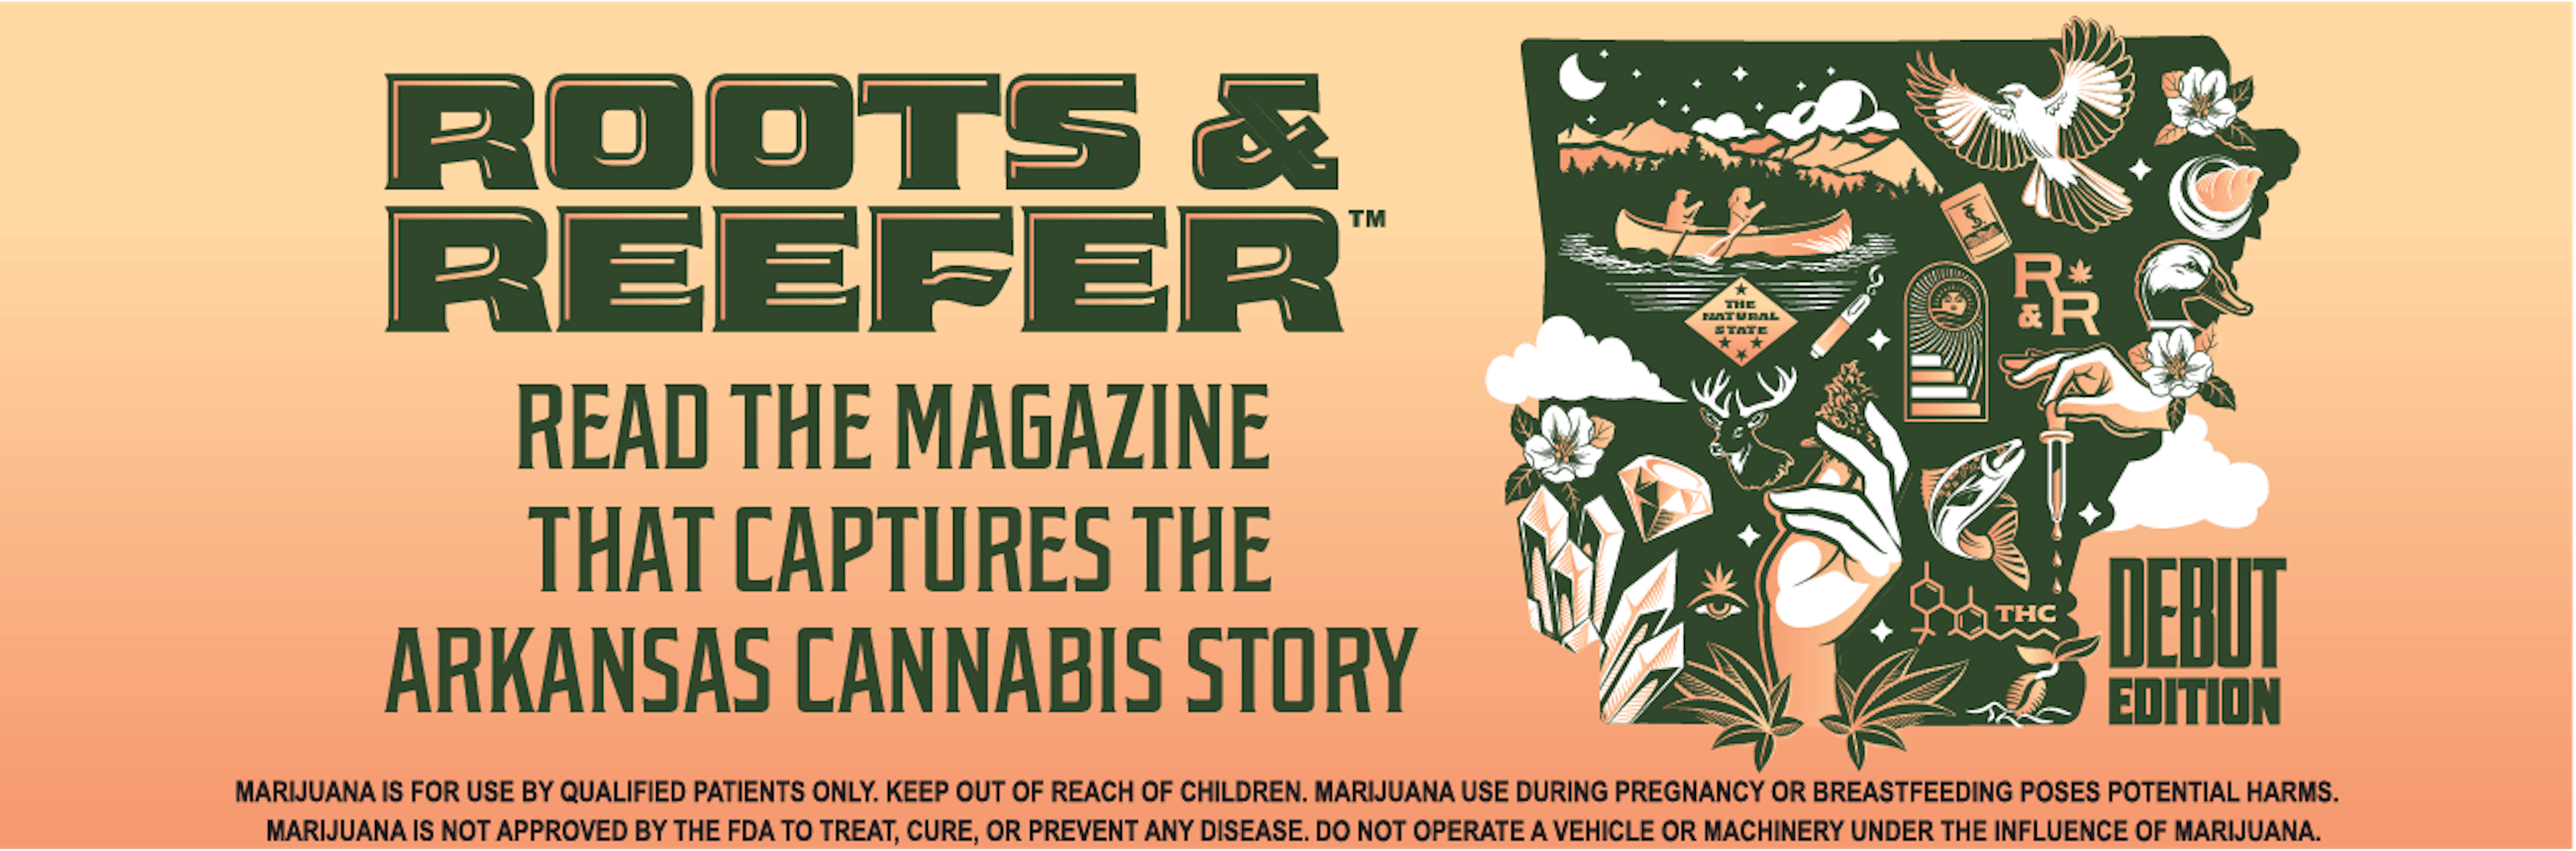 Read Roots & Reefer Debut Edition